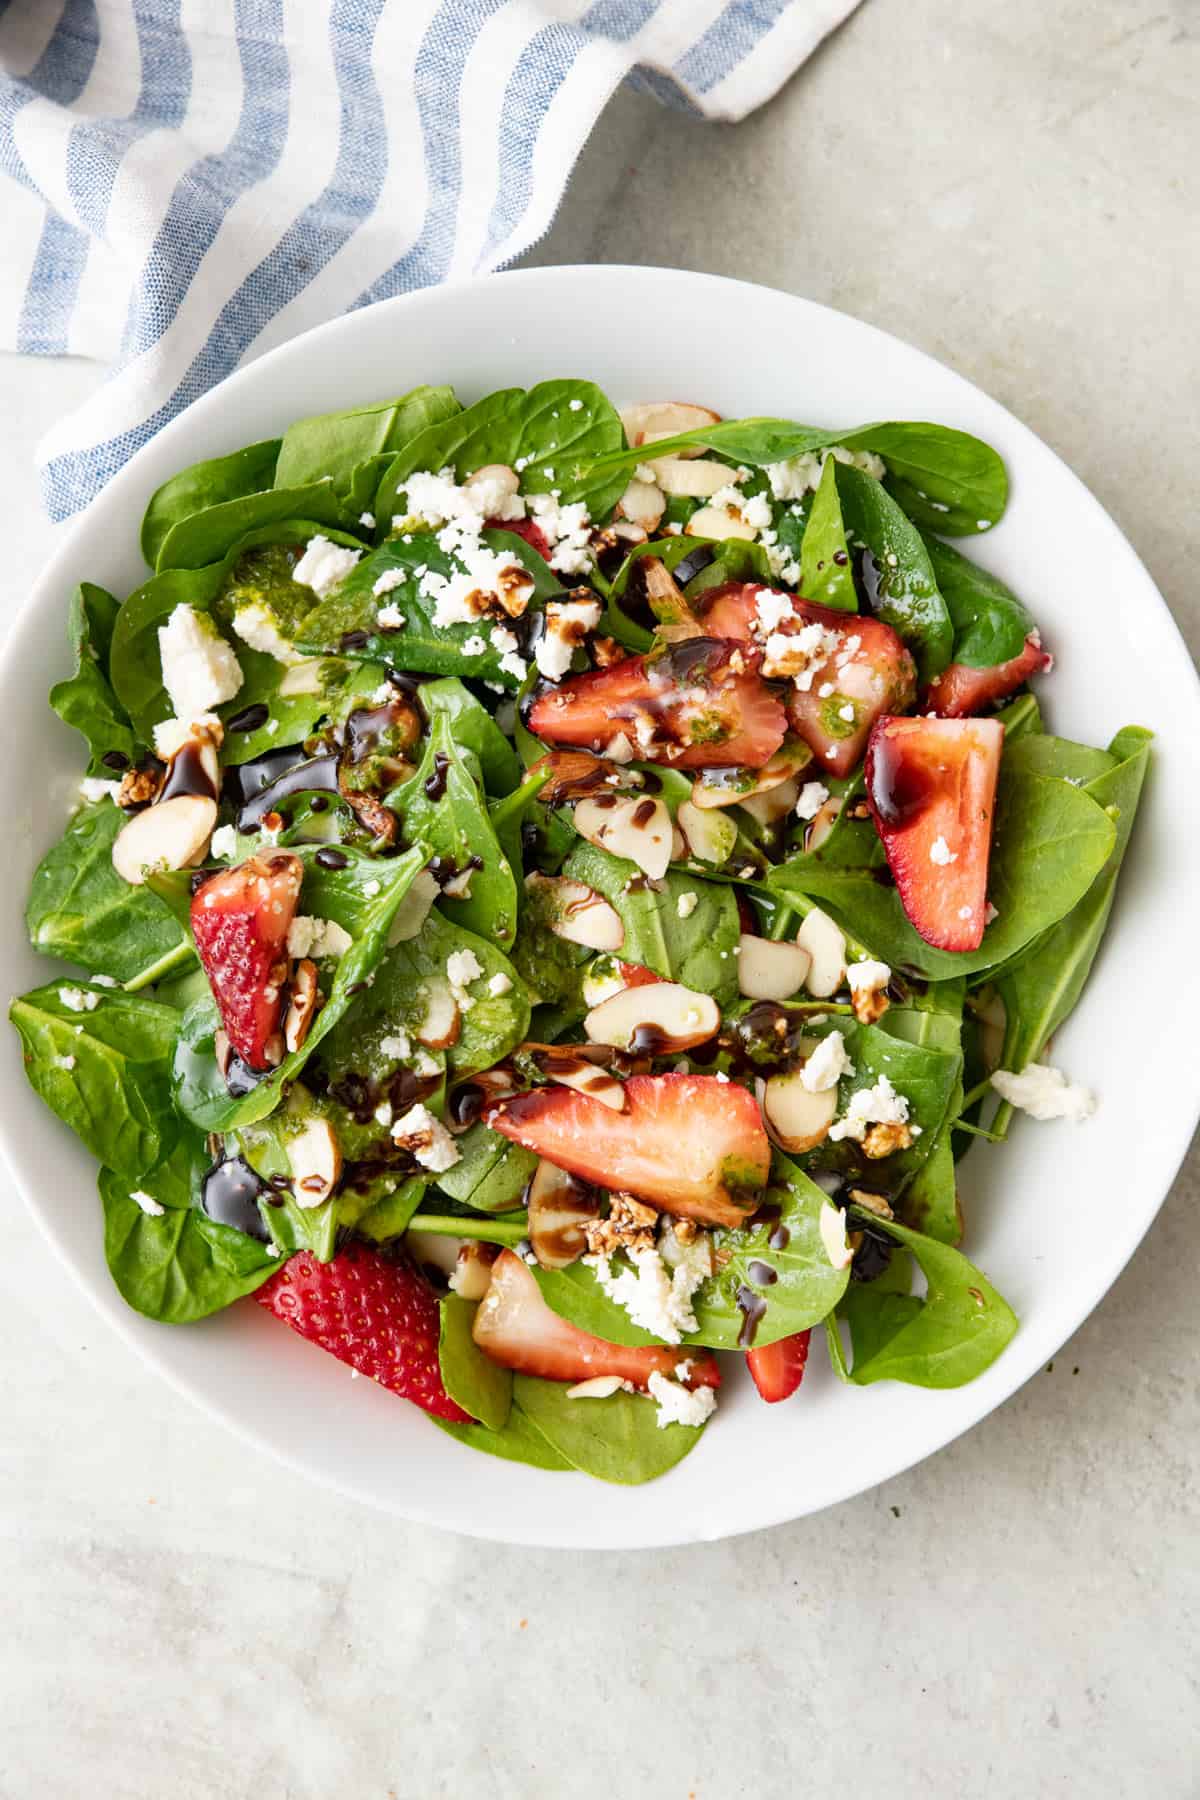 Fresh spinach salad with balsamic glaze drizzled on top.